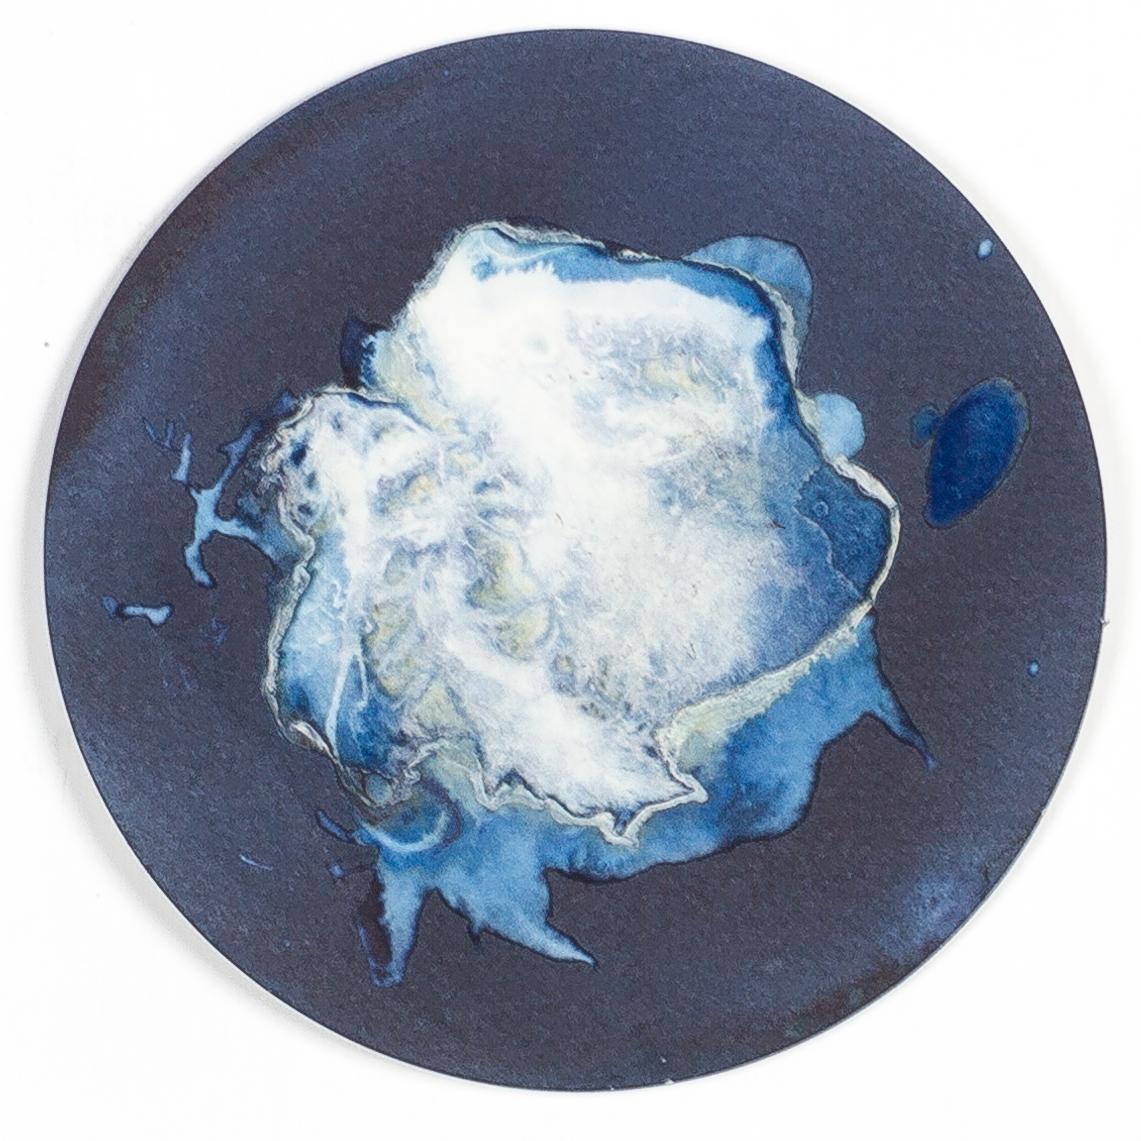 Medusas 11, 12 y 13. Cyanotype photograhs mounted in high resistance glass dish - Abstract Sculpture by Paola Davila